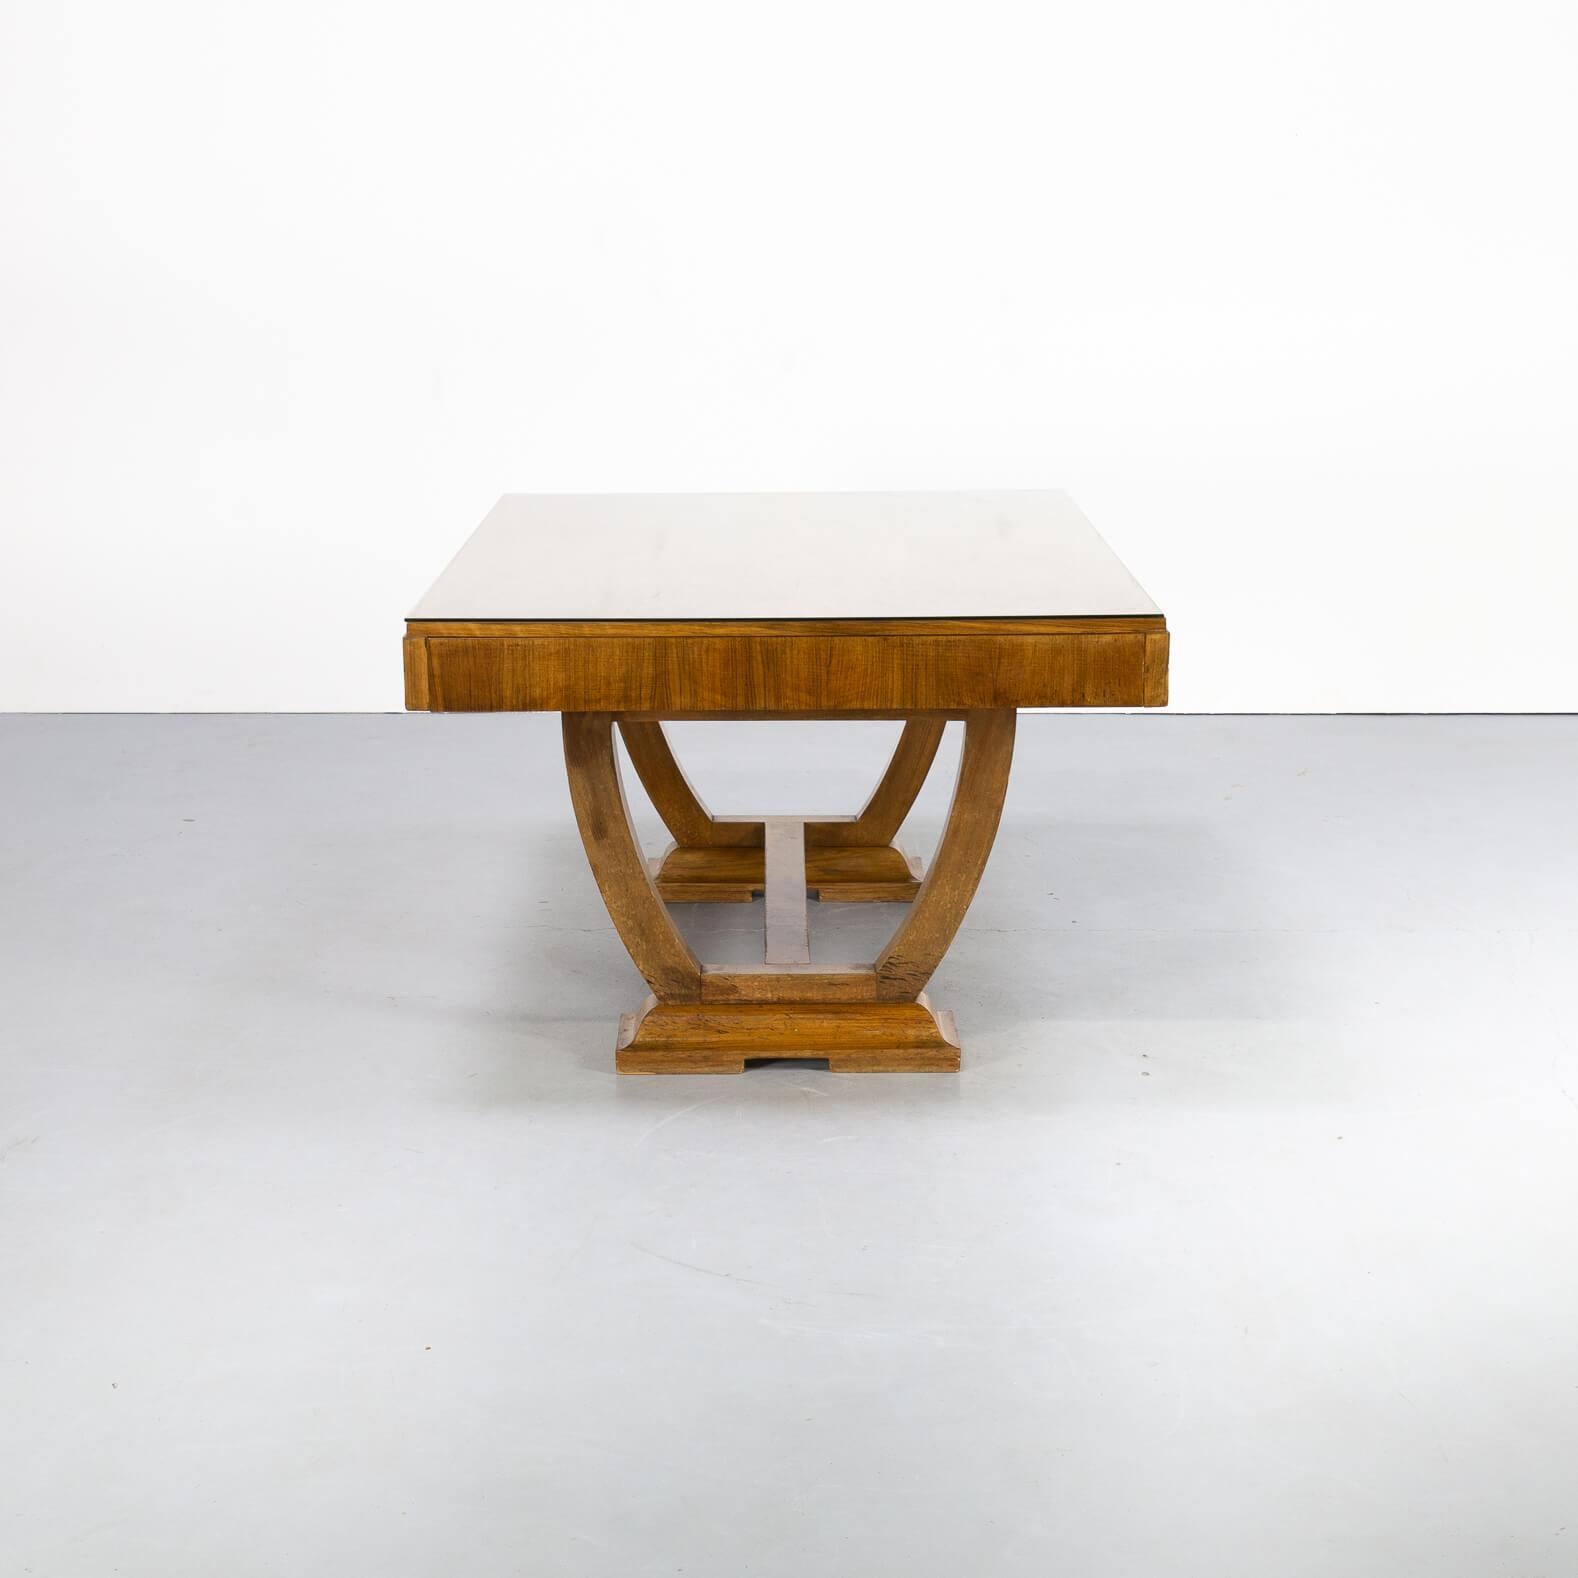 Almost square though rectangle formed beautiful Art Deco early 20st century dining table with glass table top to protect the burl walnut veneer top. The table is very rare because the top is fixed but in the construction it would have been thinkable